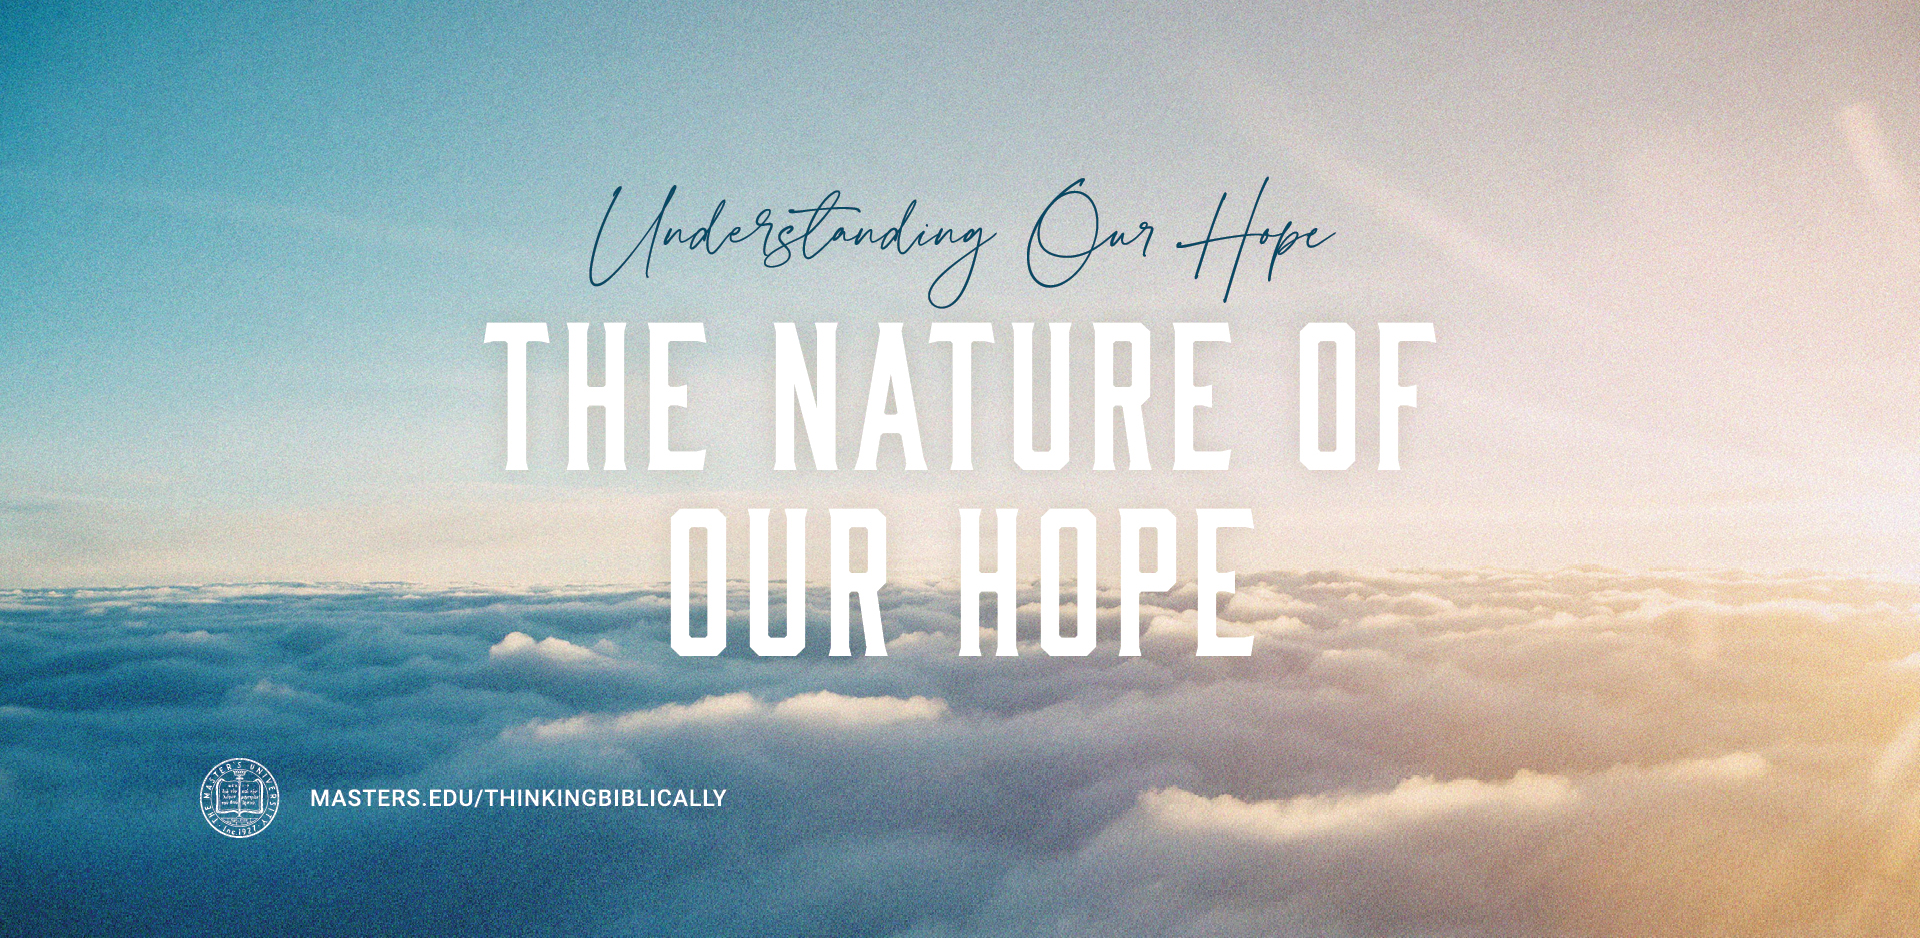 The Nature of Our Hope Featured Image